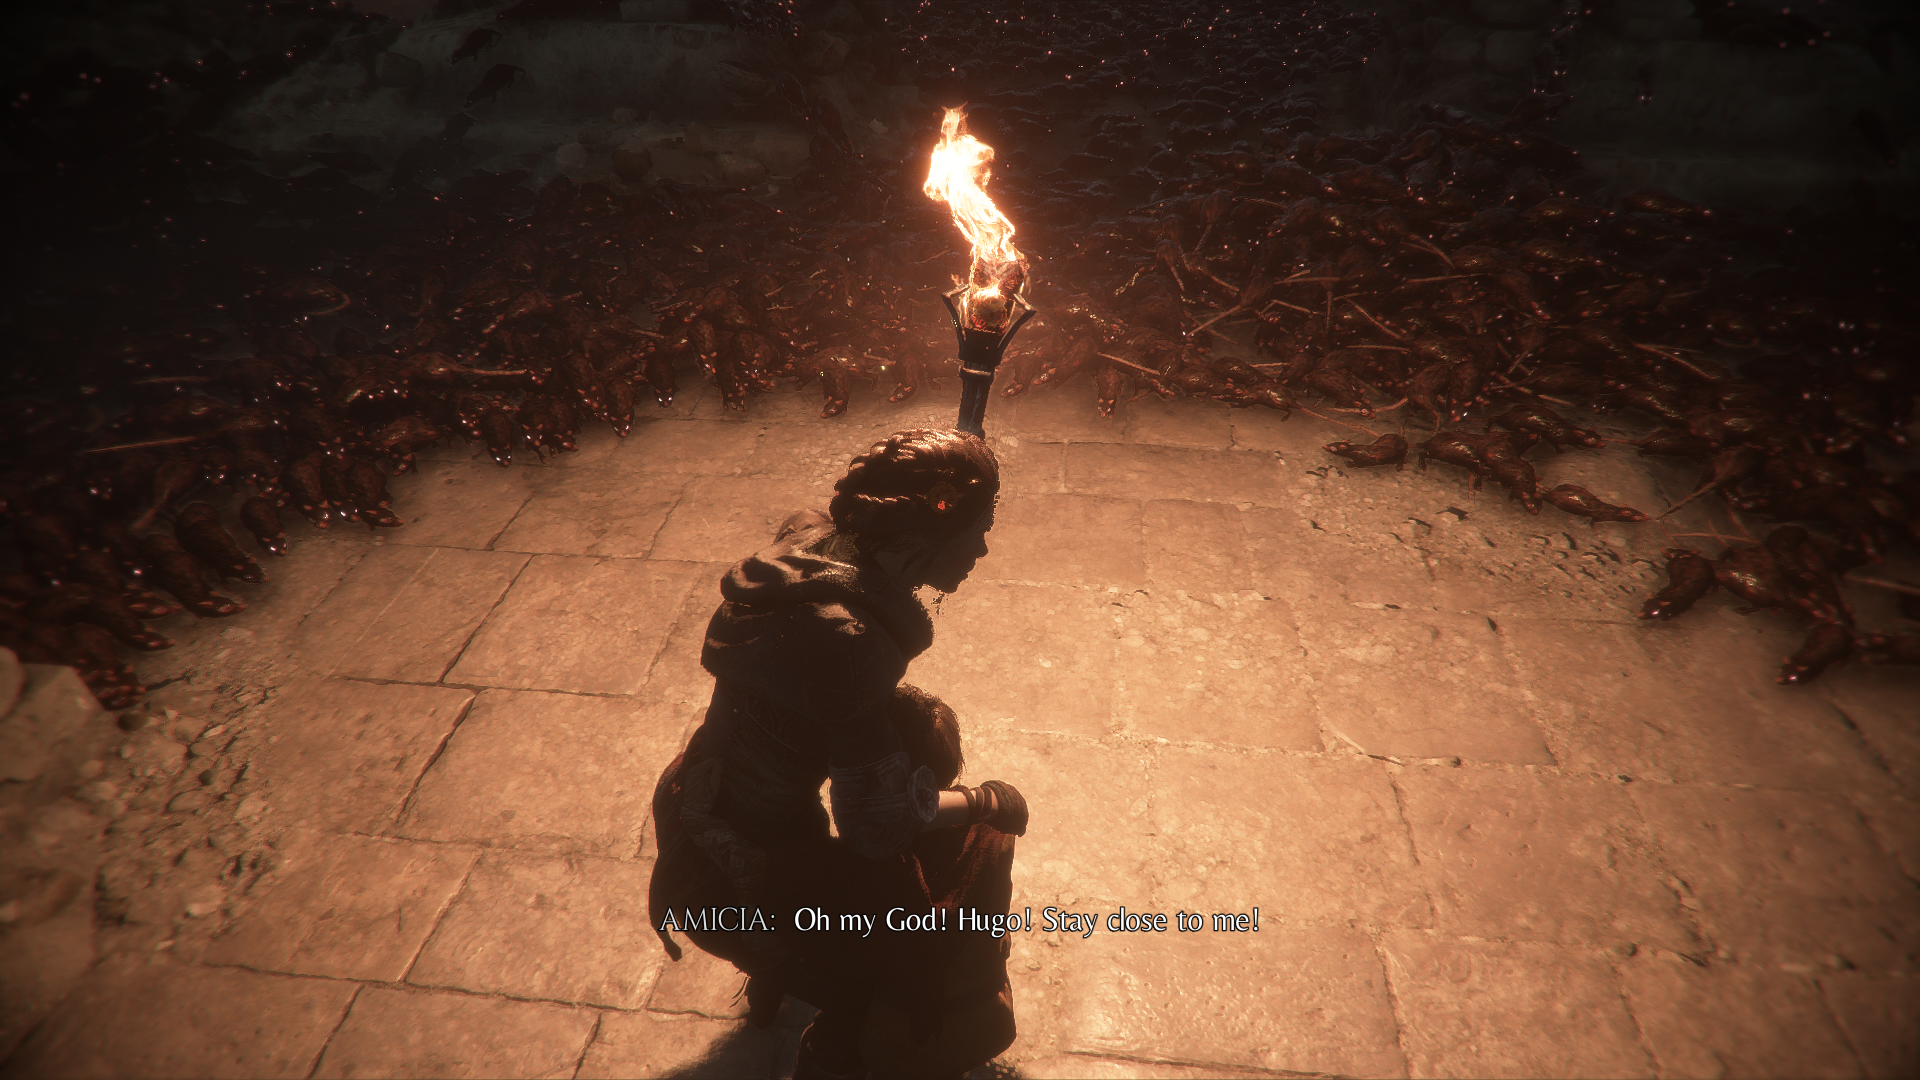 A Plague Tale sequel is rumoured to be in the works